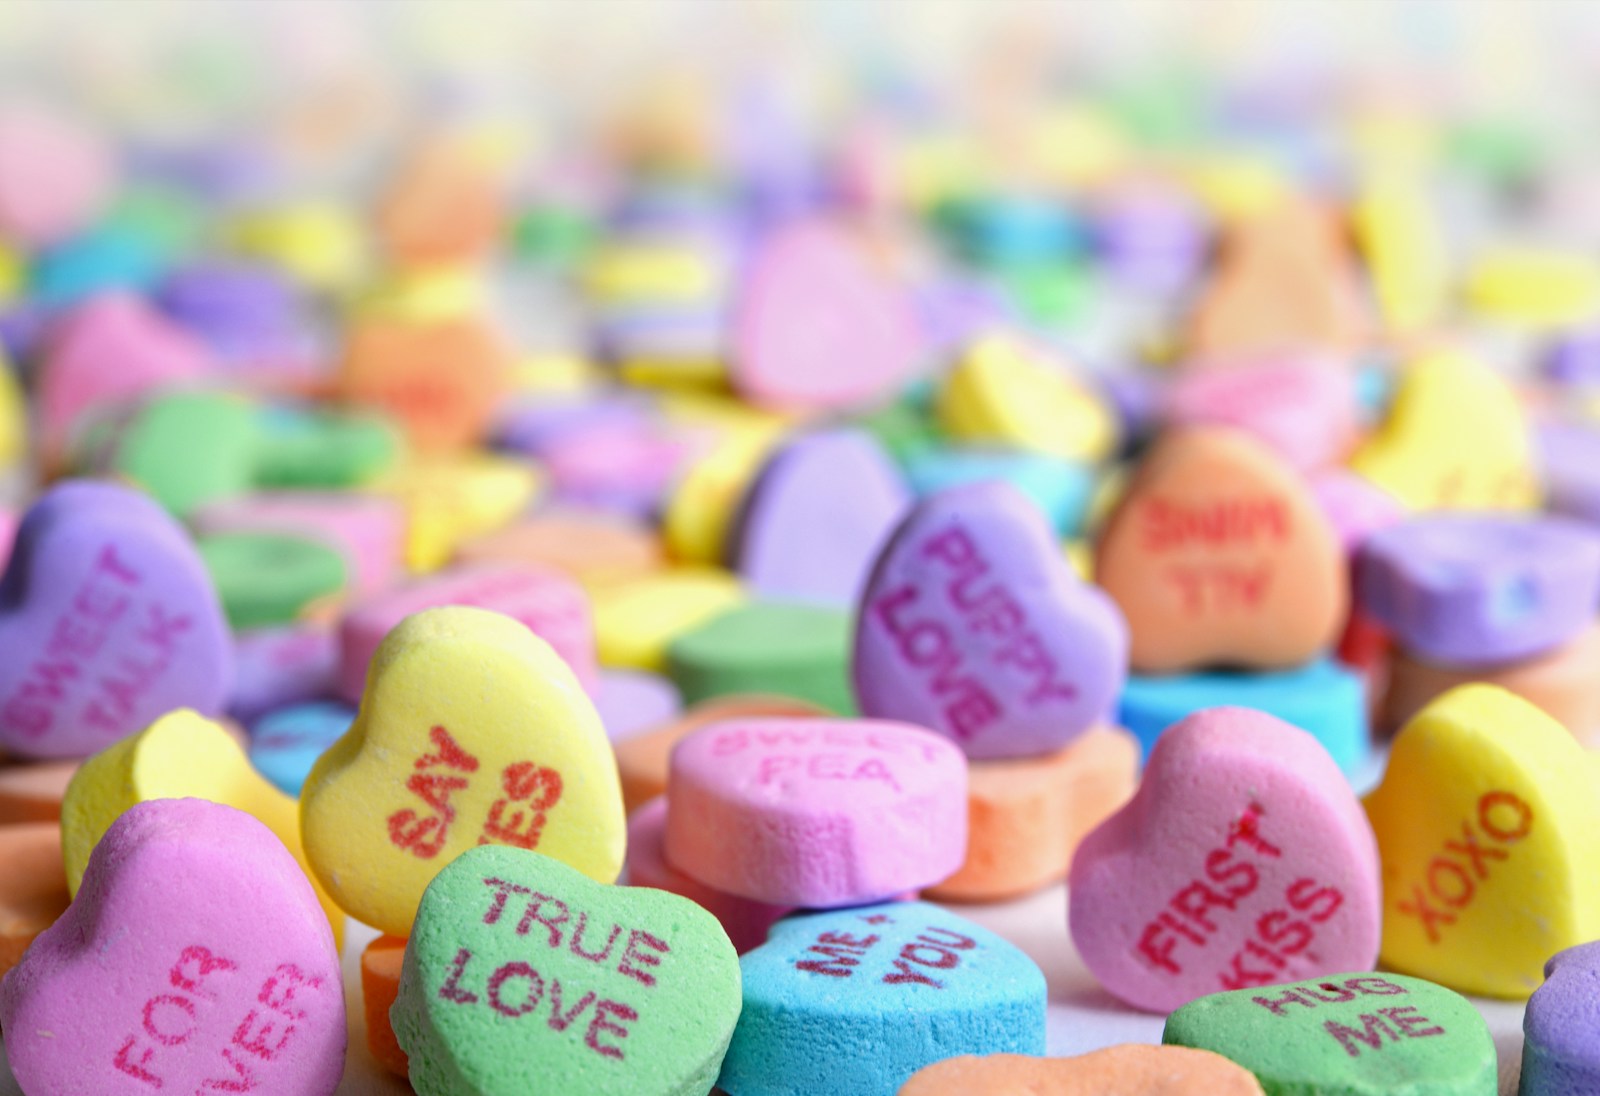 Happy Valentine's Day from all of us at Balance Real Estate Group